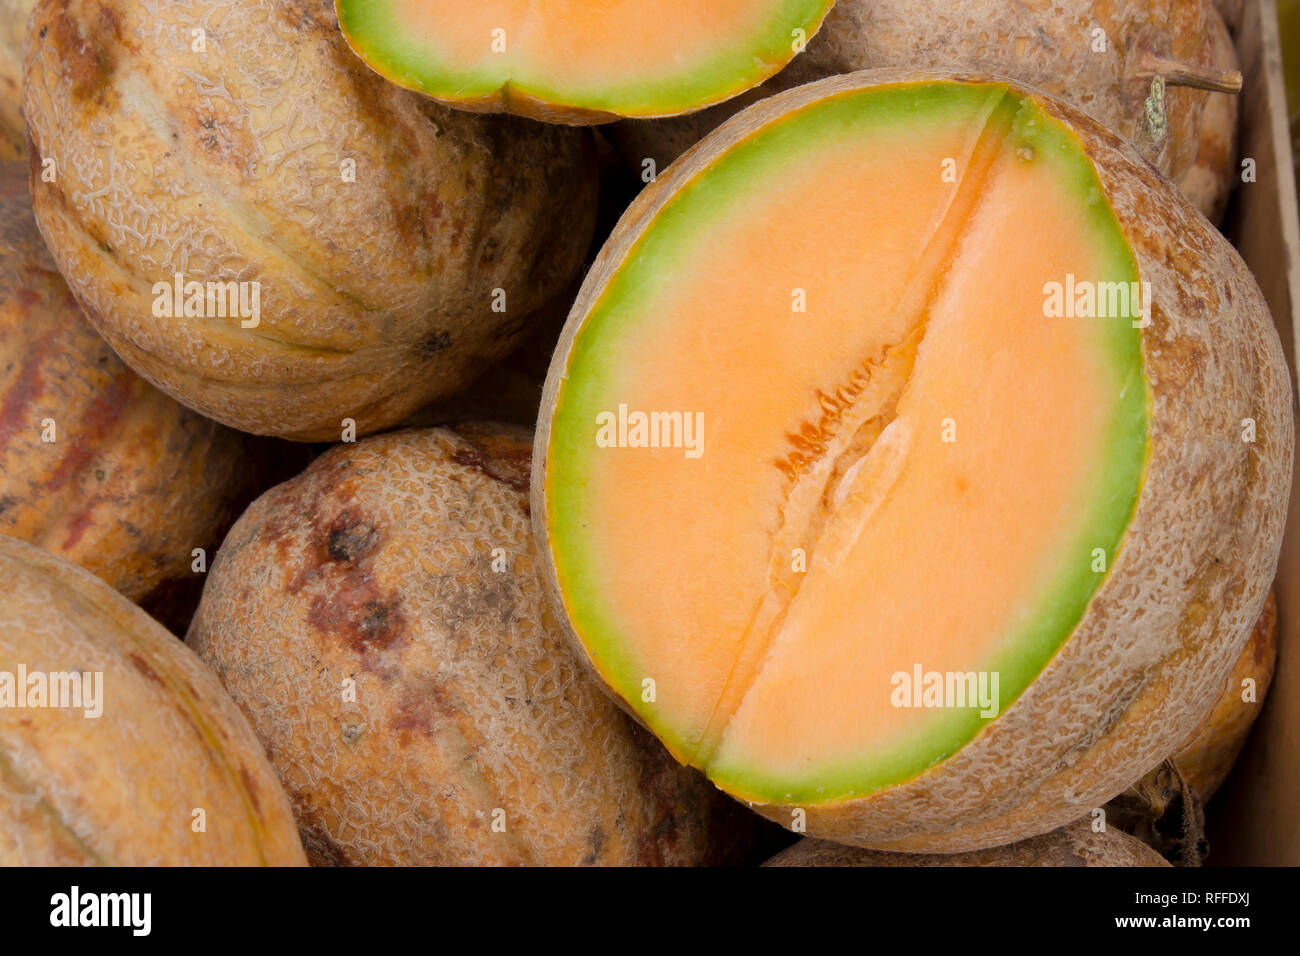 Bunch of organic cantaloupes, and one cut in half showing its orange flesh, displayed on sale on farmer's market stand in Serbia, detail Stock Photo